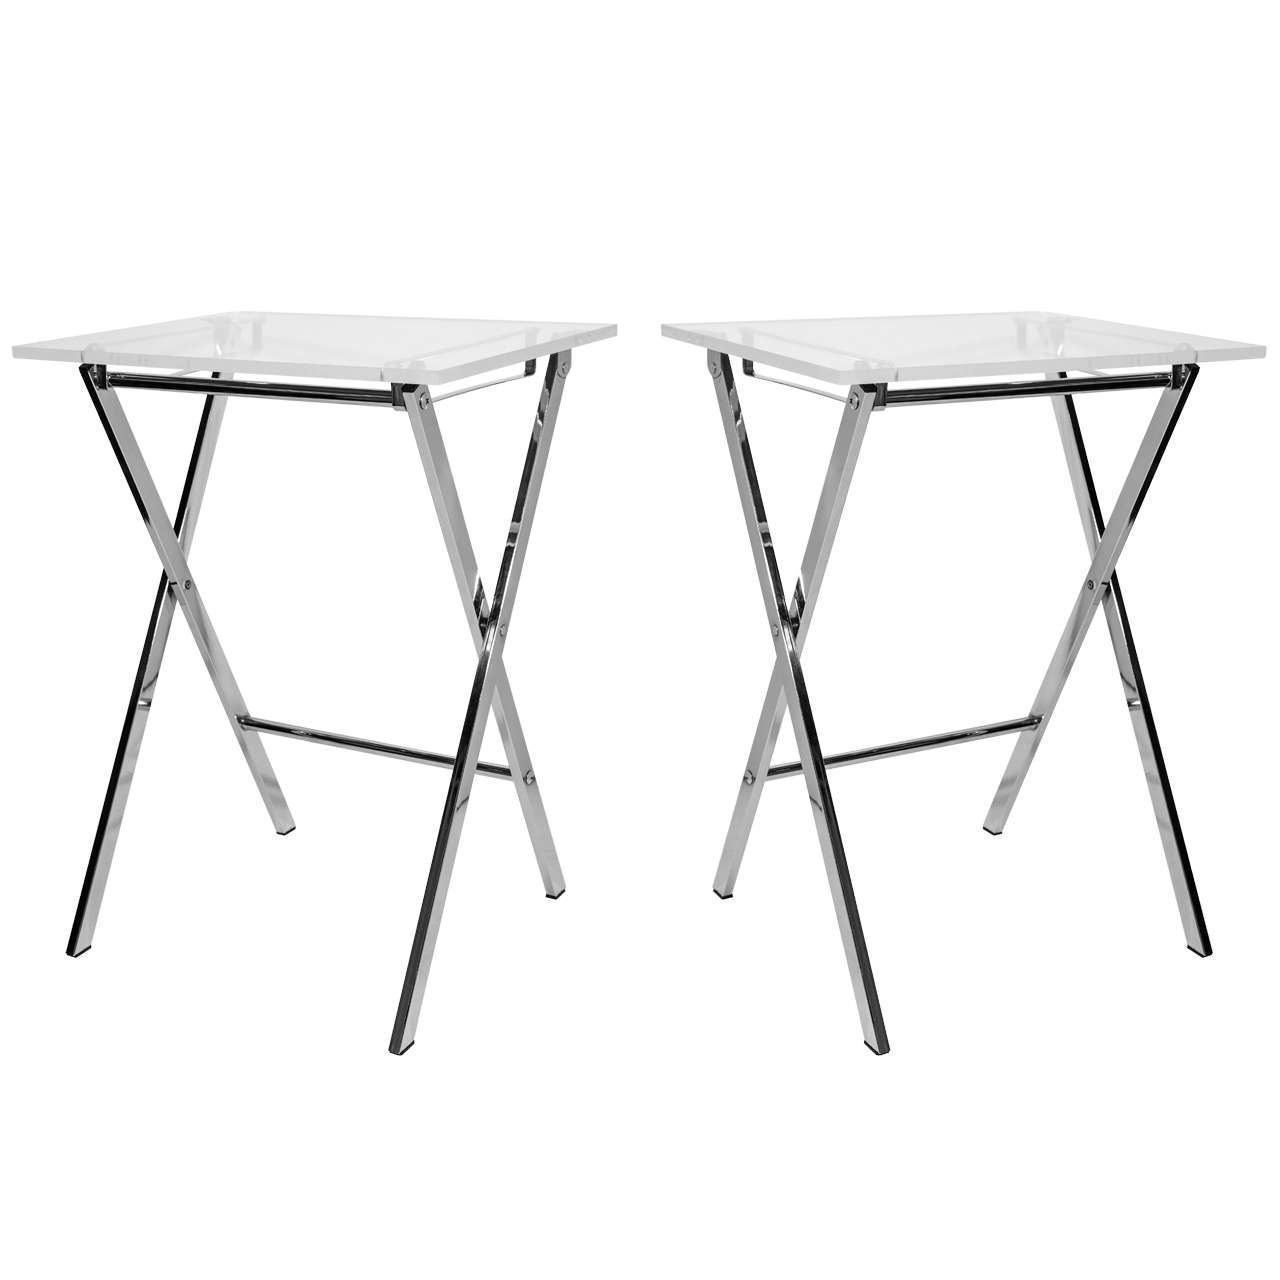 Pair of Vintage Modern Lucite & Chrome Folding Tray Tables